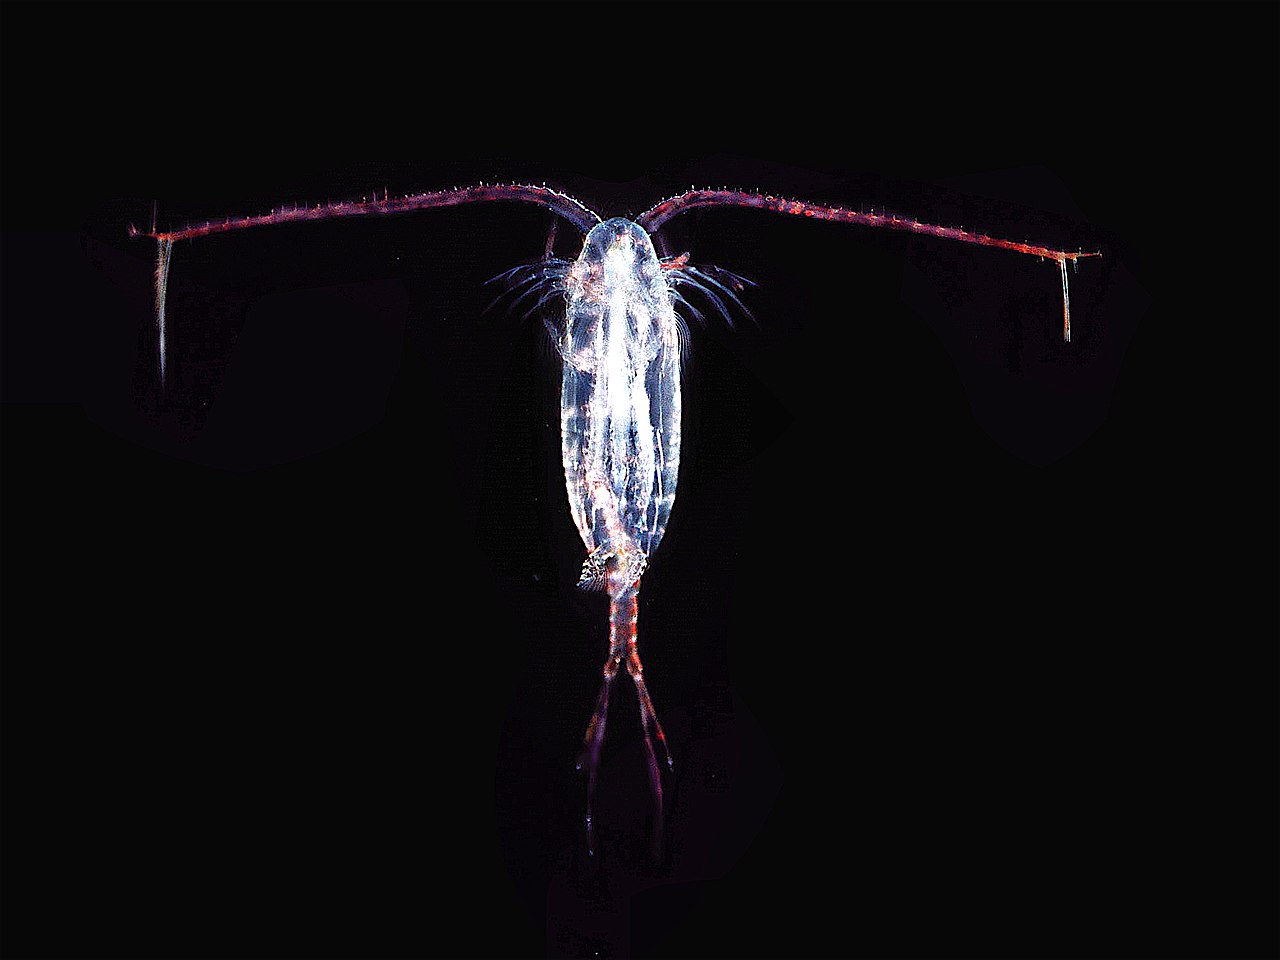 Wandering copepods can’t find their way home in acidic oceans